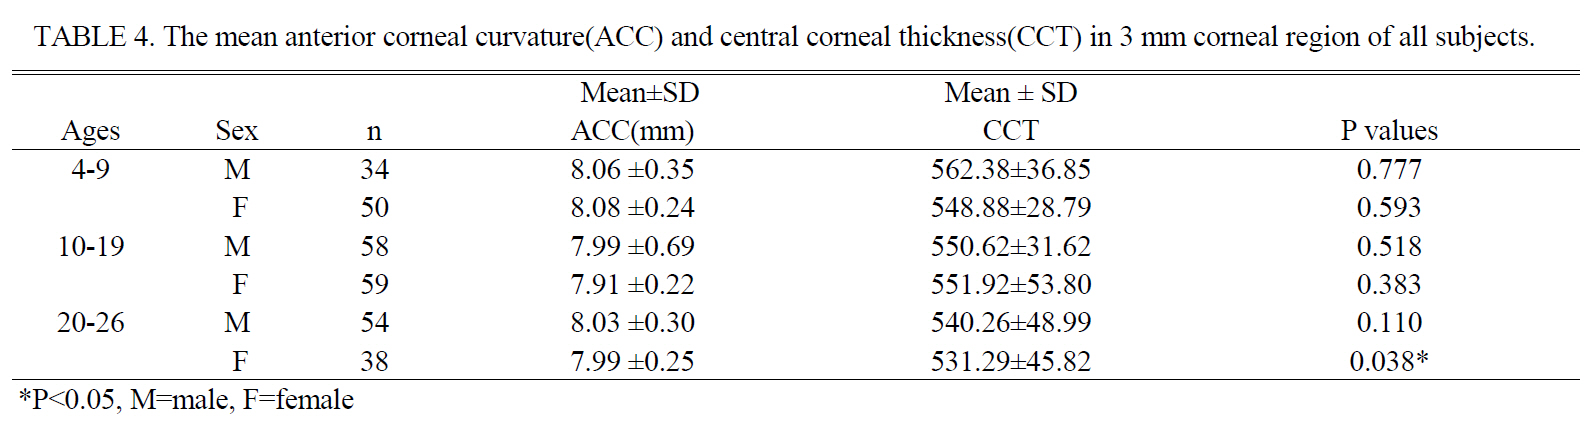 The mean anterior corneal curvature(ACC) and central corneal thickness(CCT) in 3 mm corneal region of all subjects.